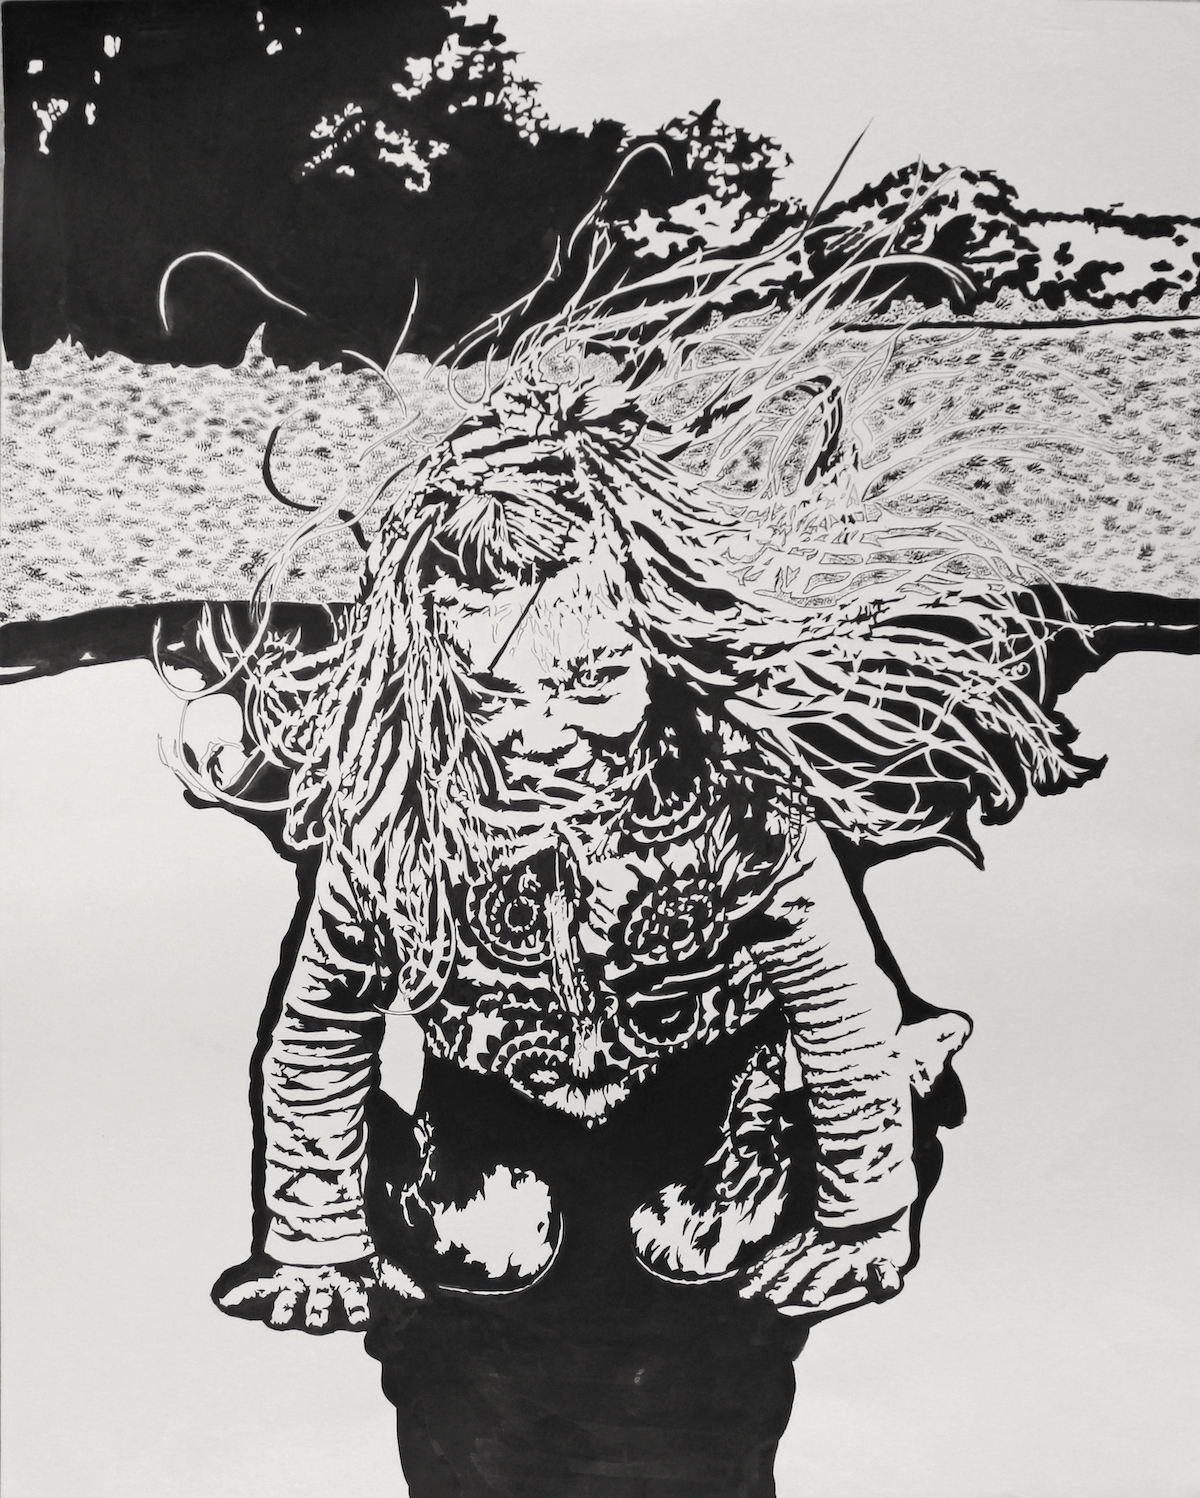 Black and white painting of a young girl on a trampoline with windblown hair